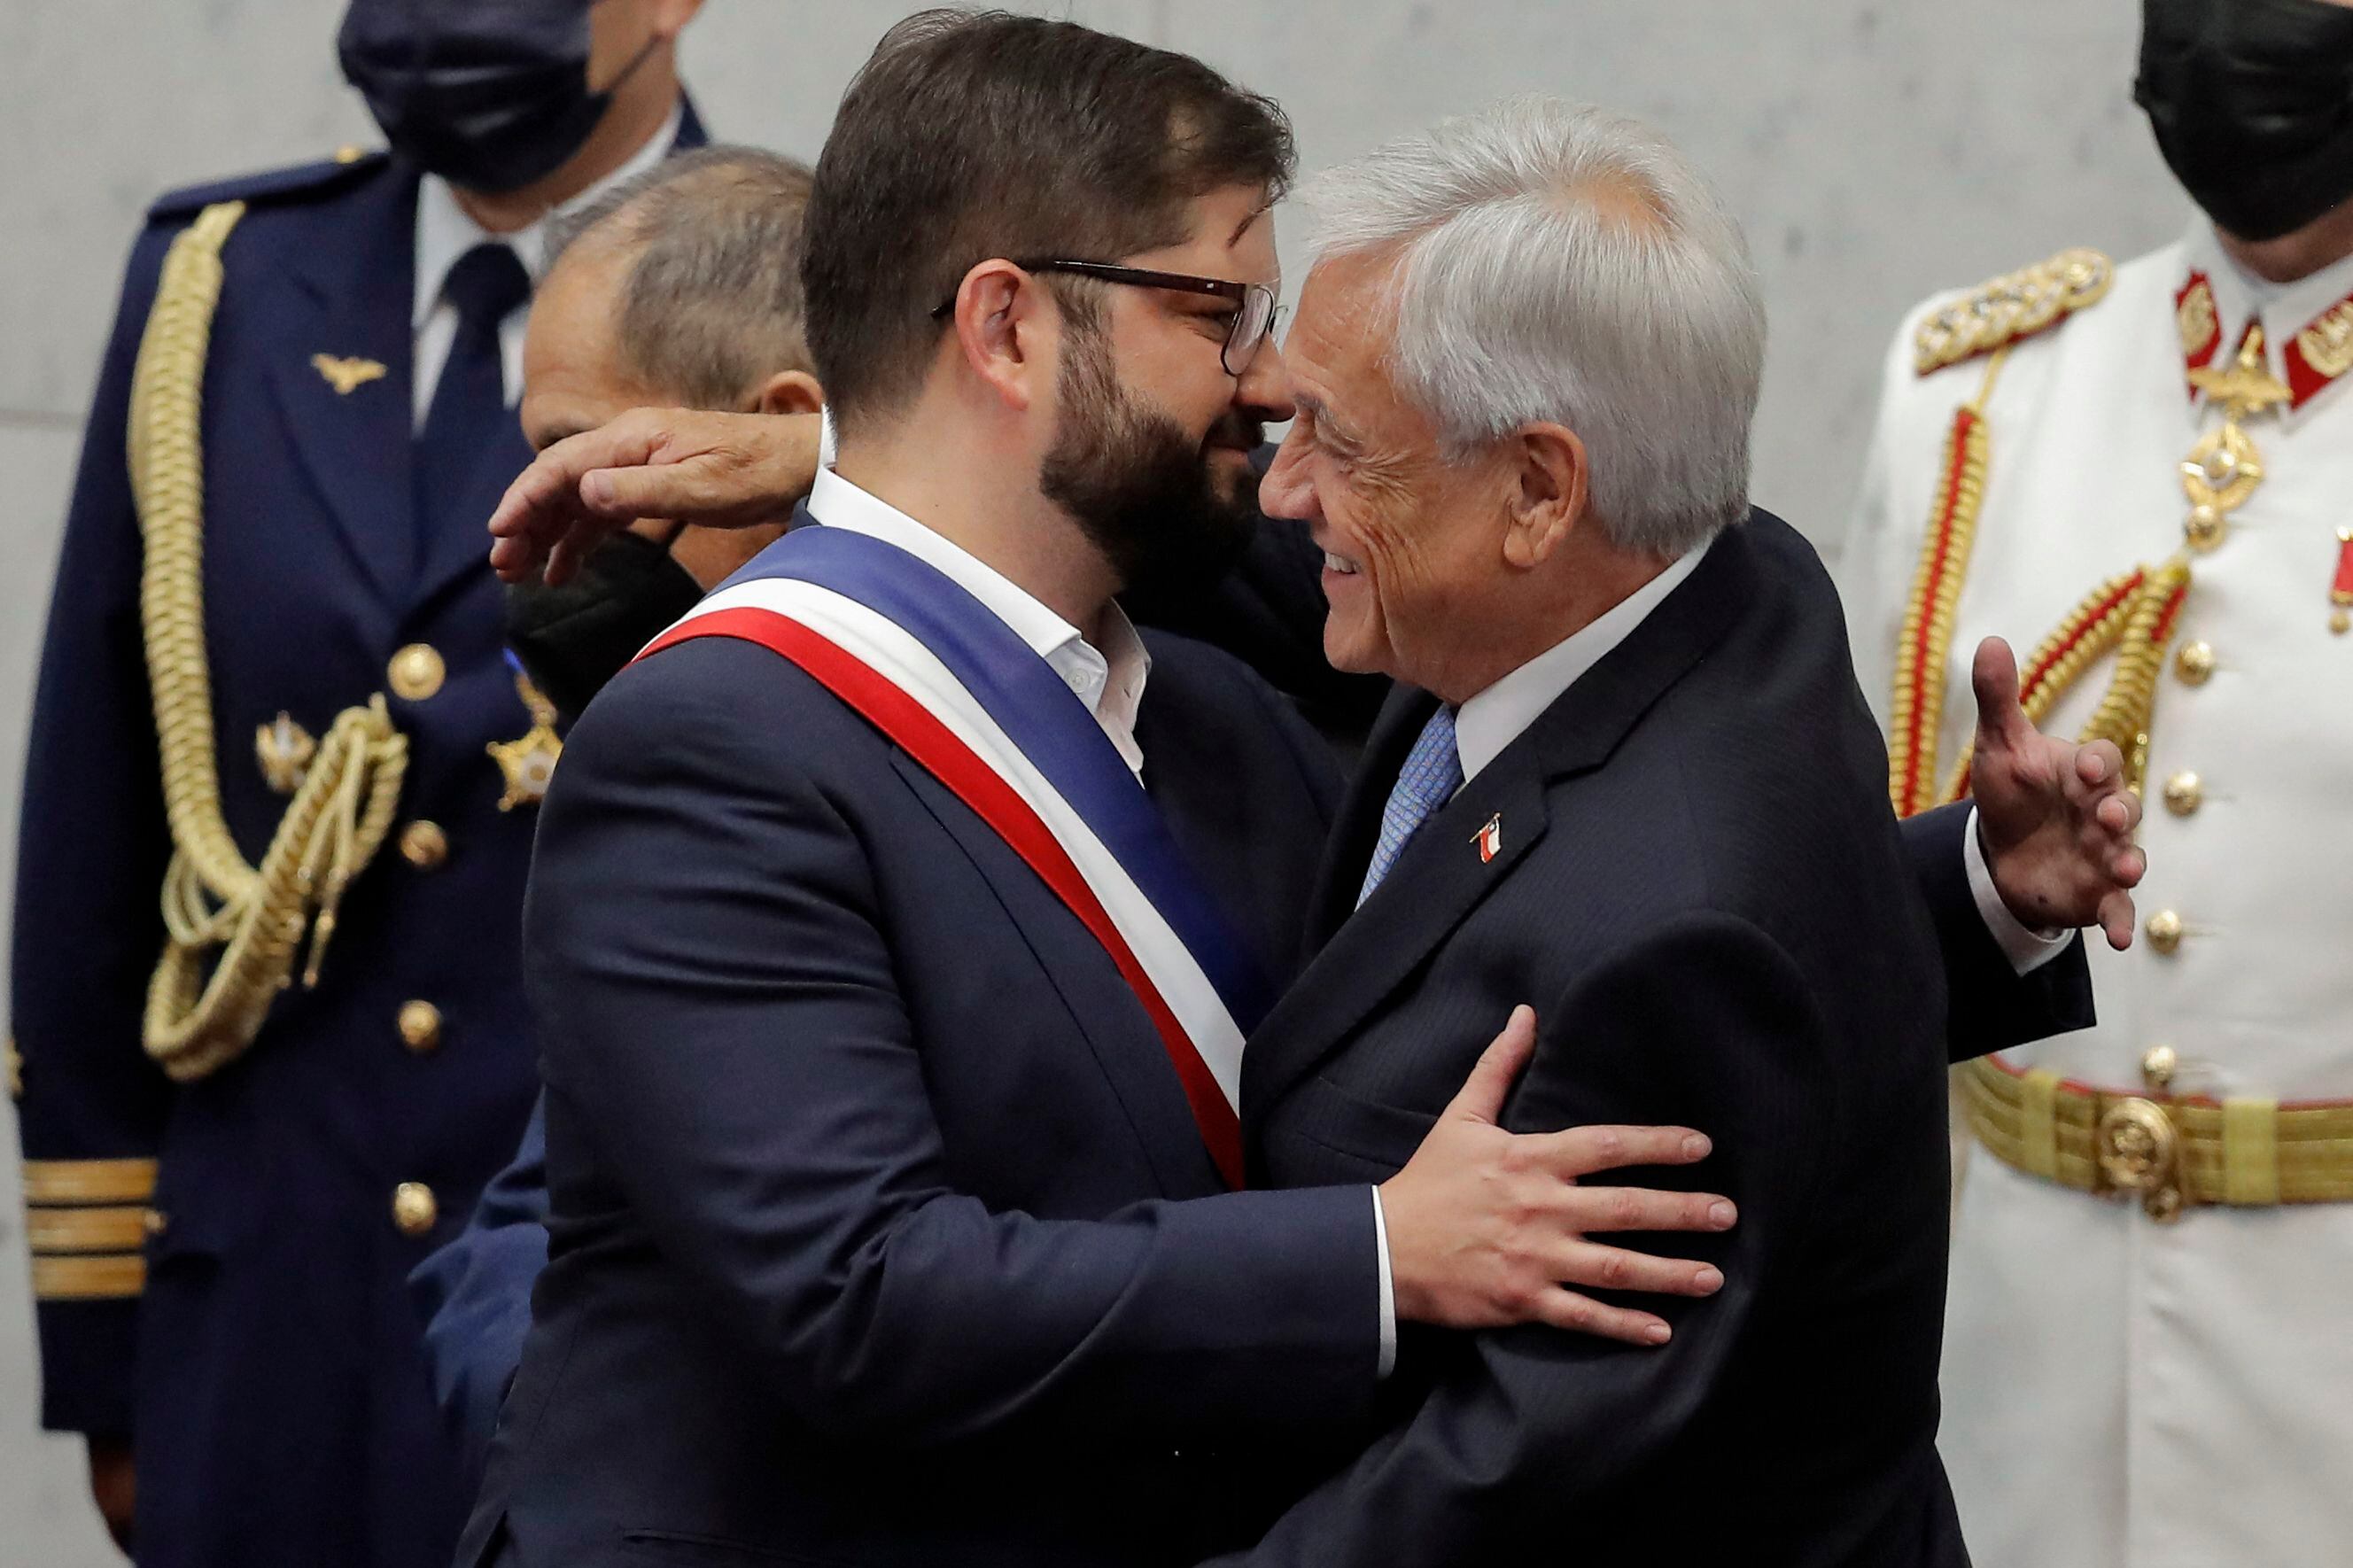 Chile's new President Gabriel Boric (L) is greeted by outgoing President Sebastian Pi�era during his inauguration ceremony at the Congress in Valparaiso, Chile on March 11, 2022. - Leftist former student leader Gabriel Boric sworn in Friday as Chile's youngest-ever president, with plans to turn the country that for decades has served as a neoliberal laboratory into a greener, more egalitarian "welfare state." (Photo by JAVIER TORRES / AFP)